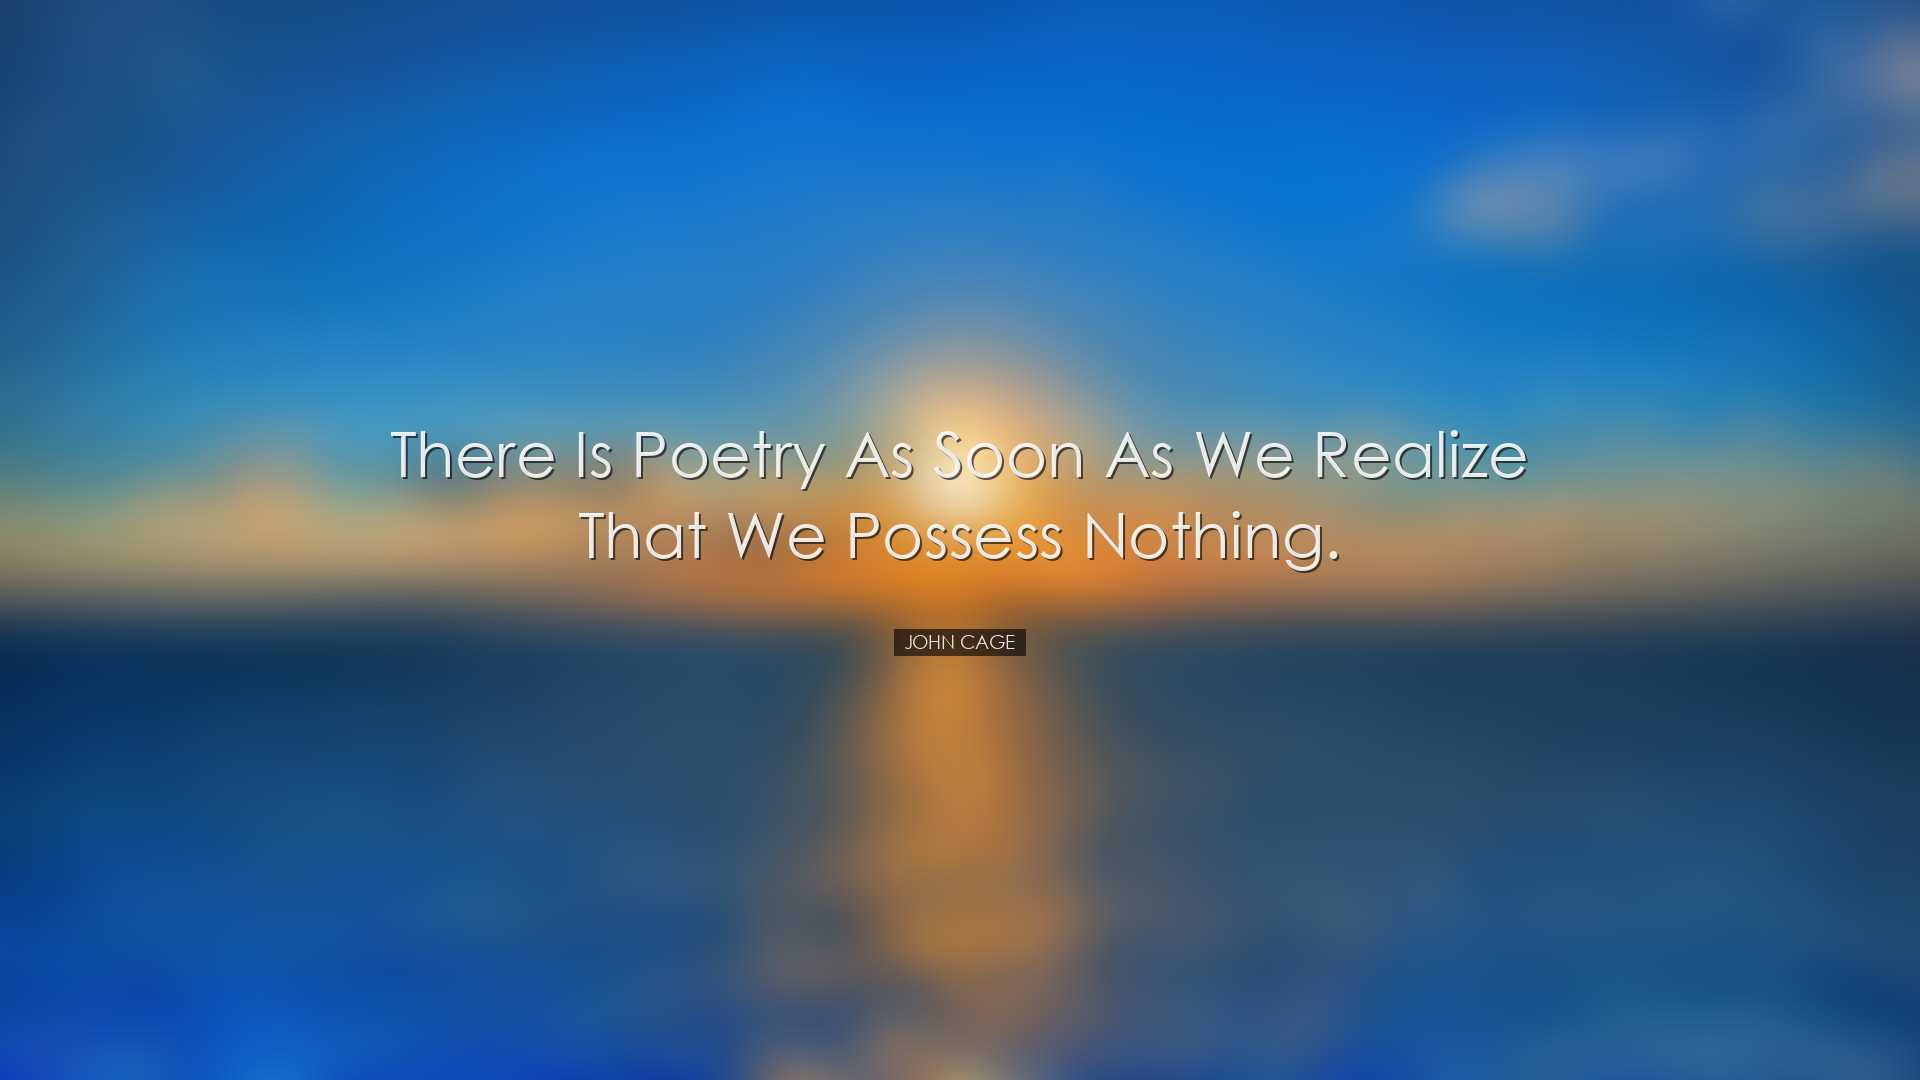 There is poetry as soon as we realize that we possess nothing. - J